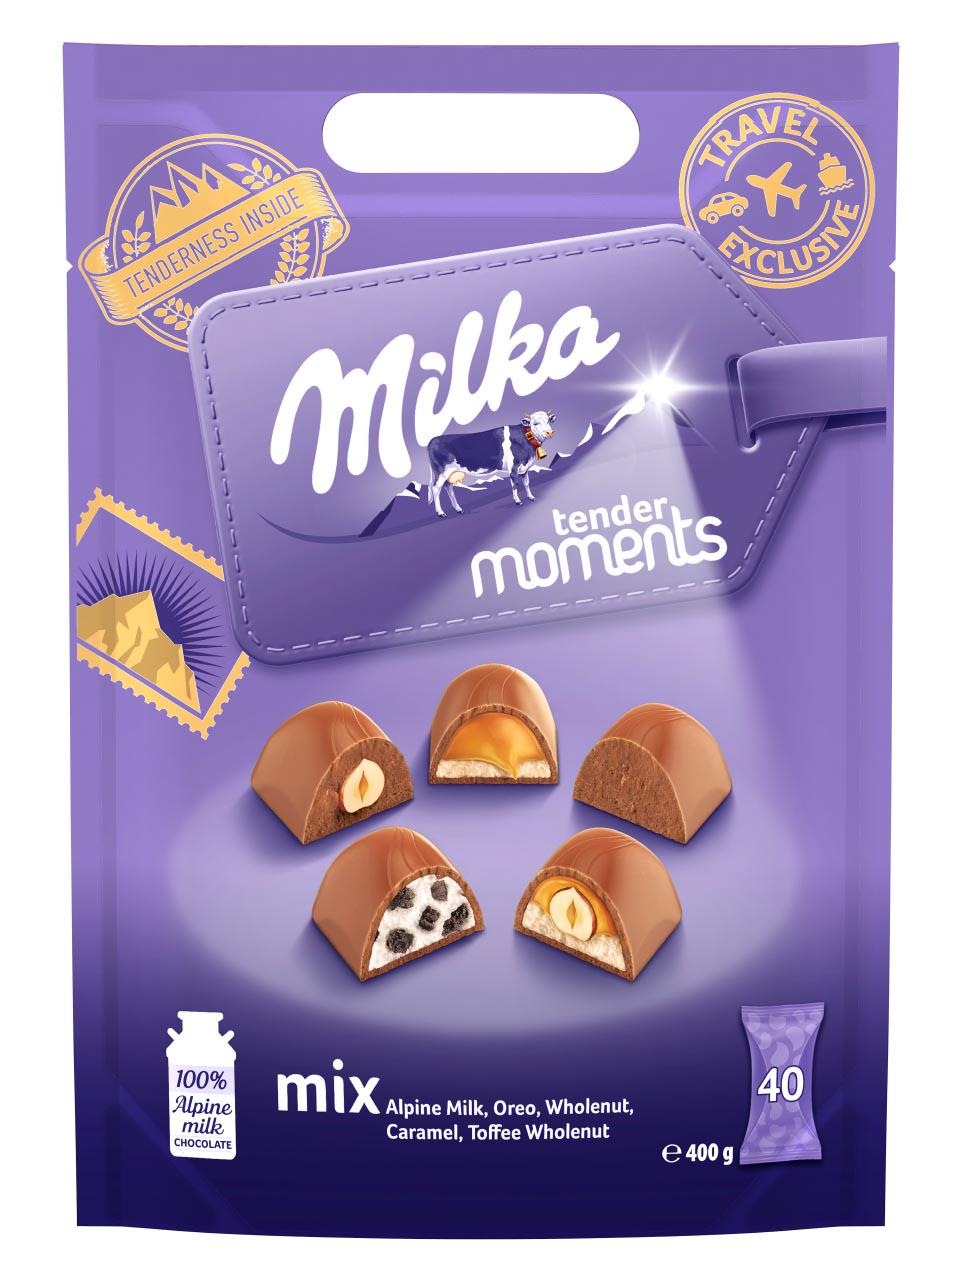 Moments 400g Milka | Assorted Shopping Online Pouch Frankfurt Airport